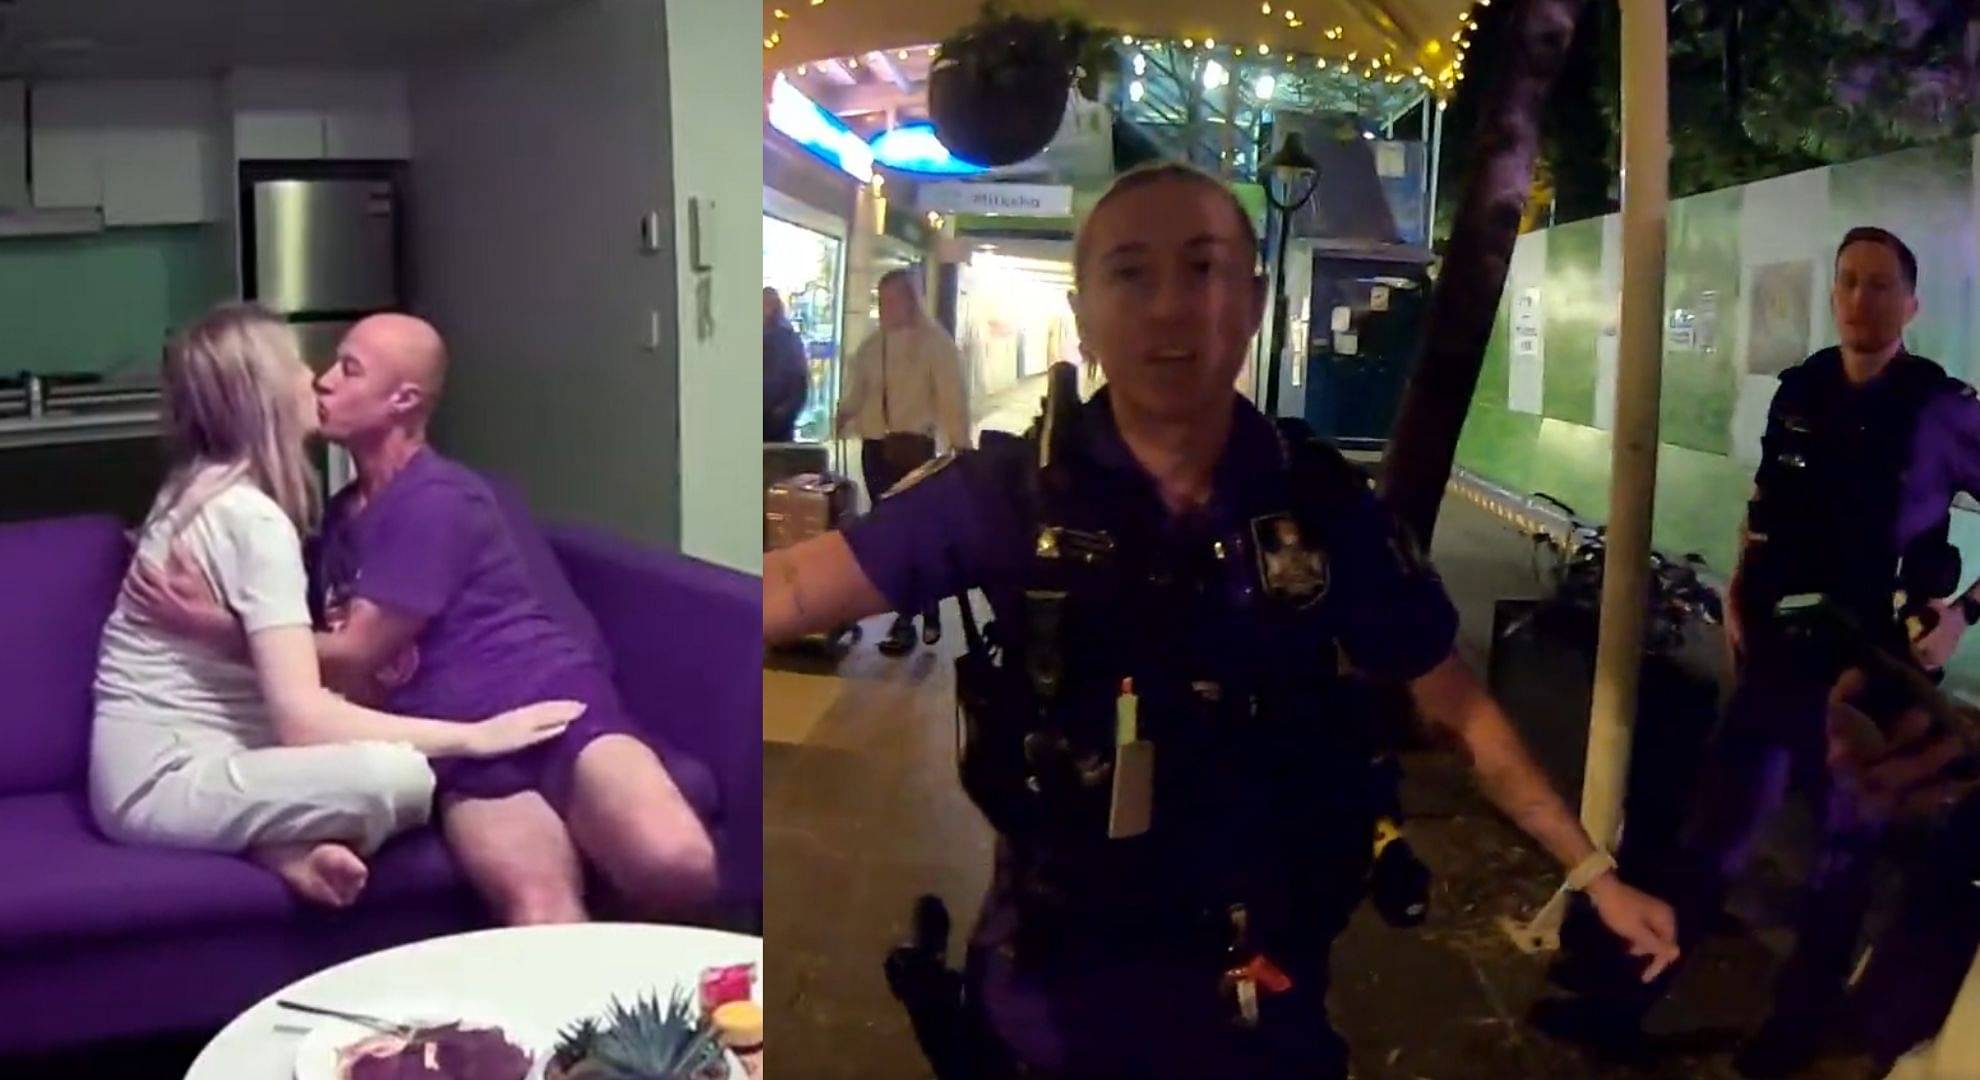 Ice Poseidon is arrested in Brisbane for sexual assault after he paid a man to bring an escort while live streaming